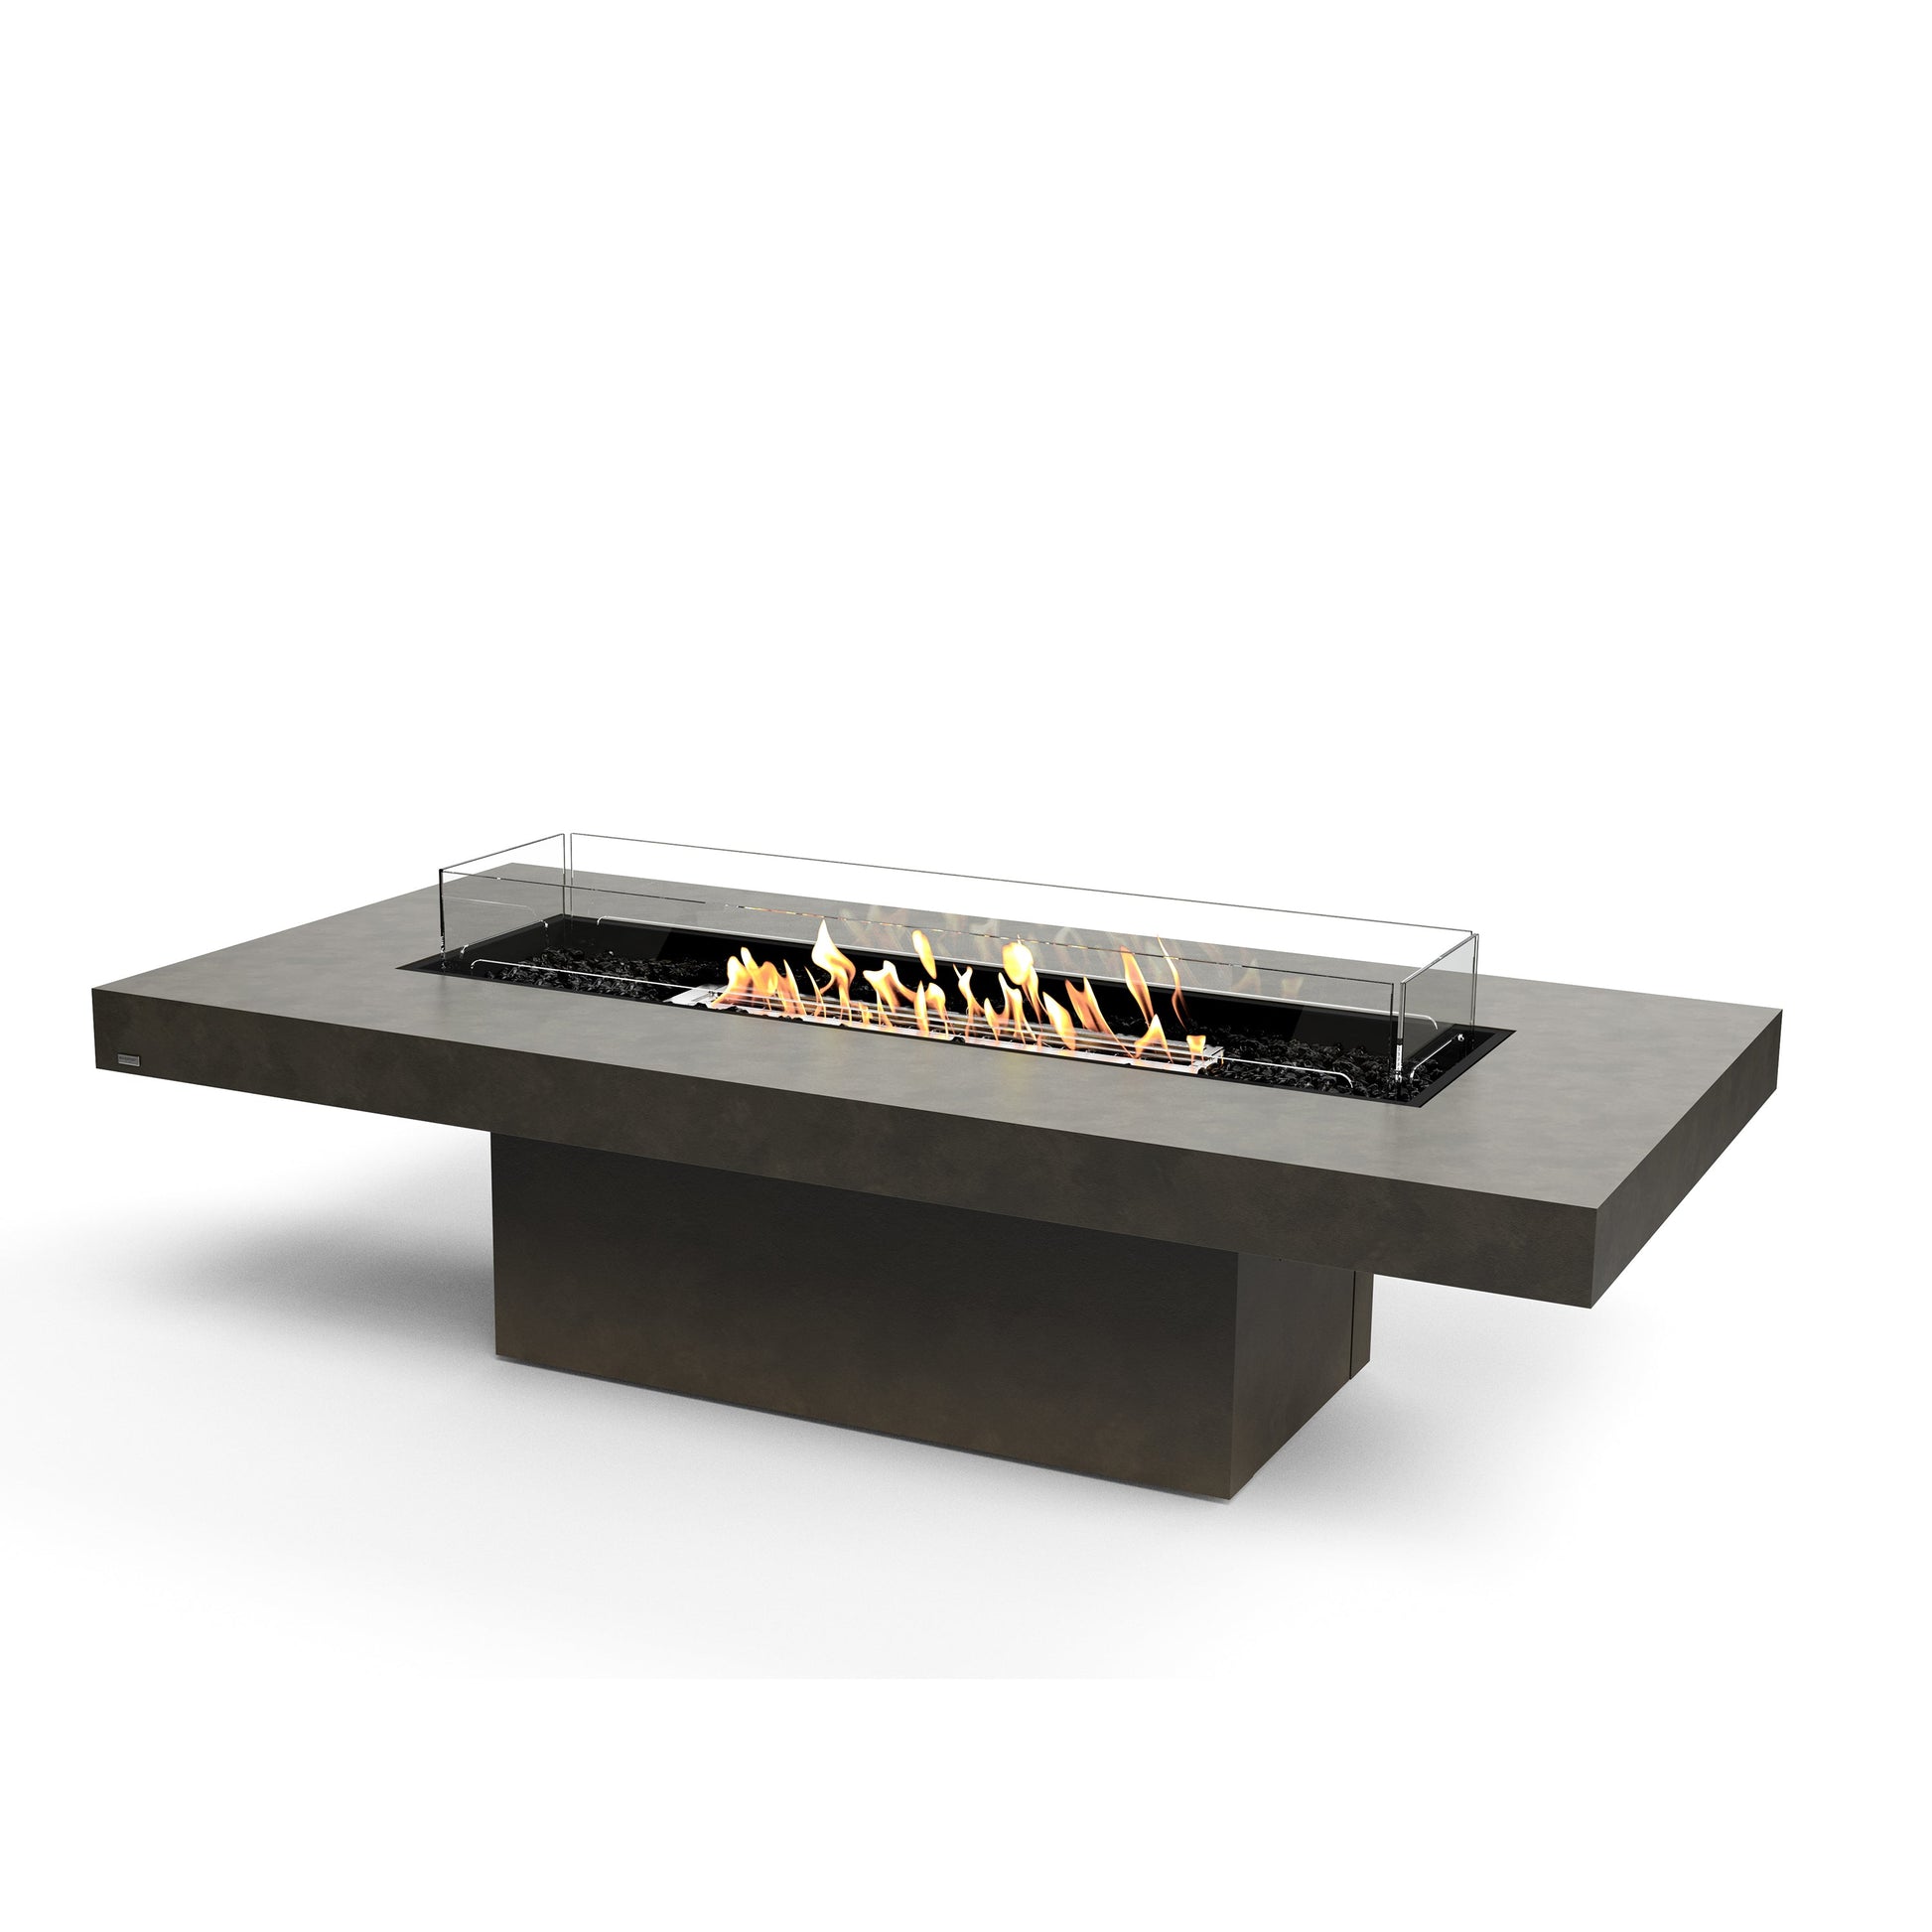 EcoSmart Fire 89" Gin 90 Chat Height Fire Pit Table with Ethanol Burner by Mad Design Group